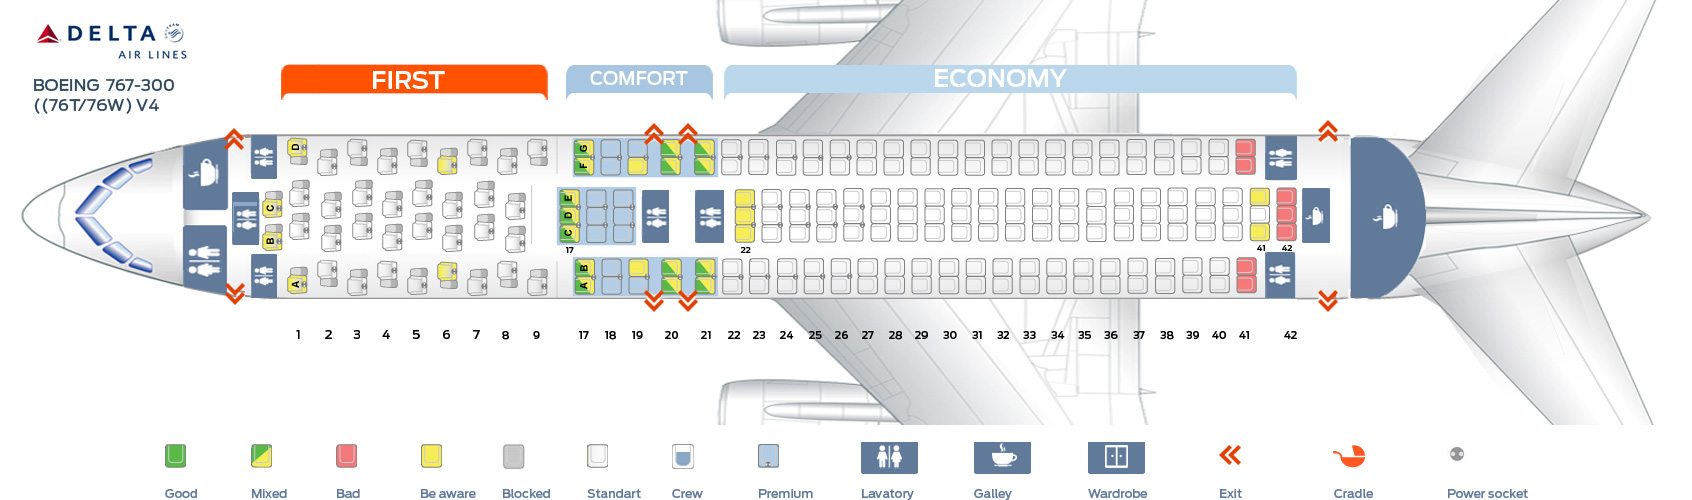 Boeing 767 Jet Seating Chart Hawaiian Airlines